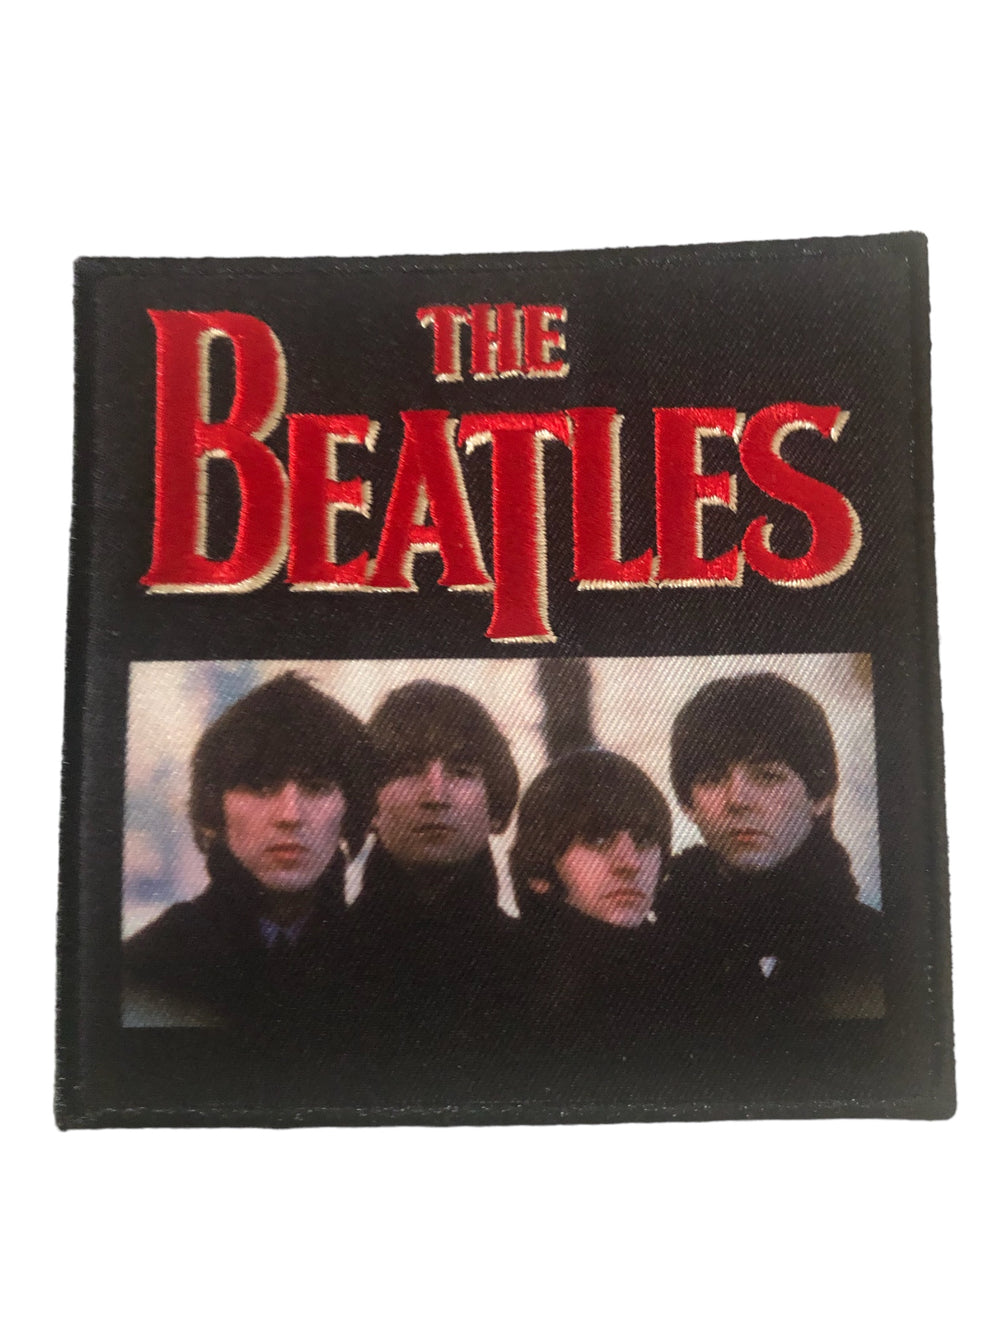 Beatles  For Sale Photo Official Woven Patch Brand New